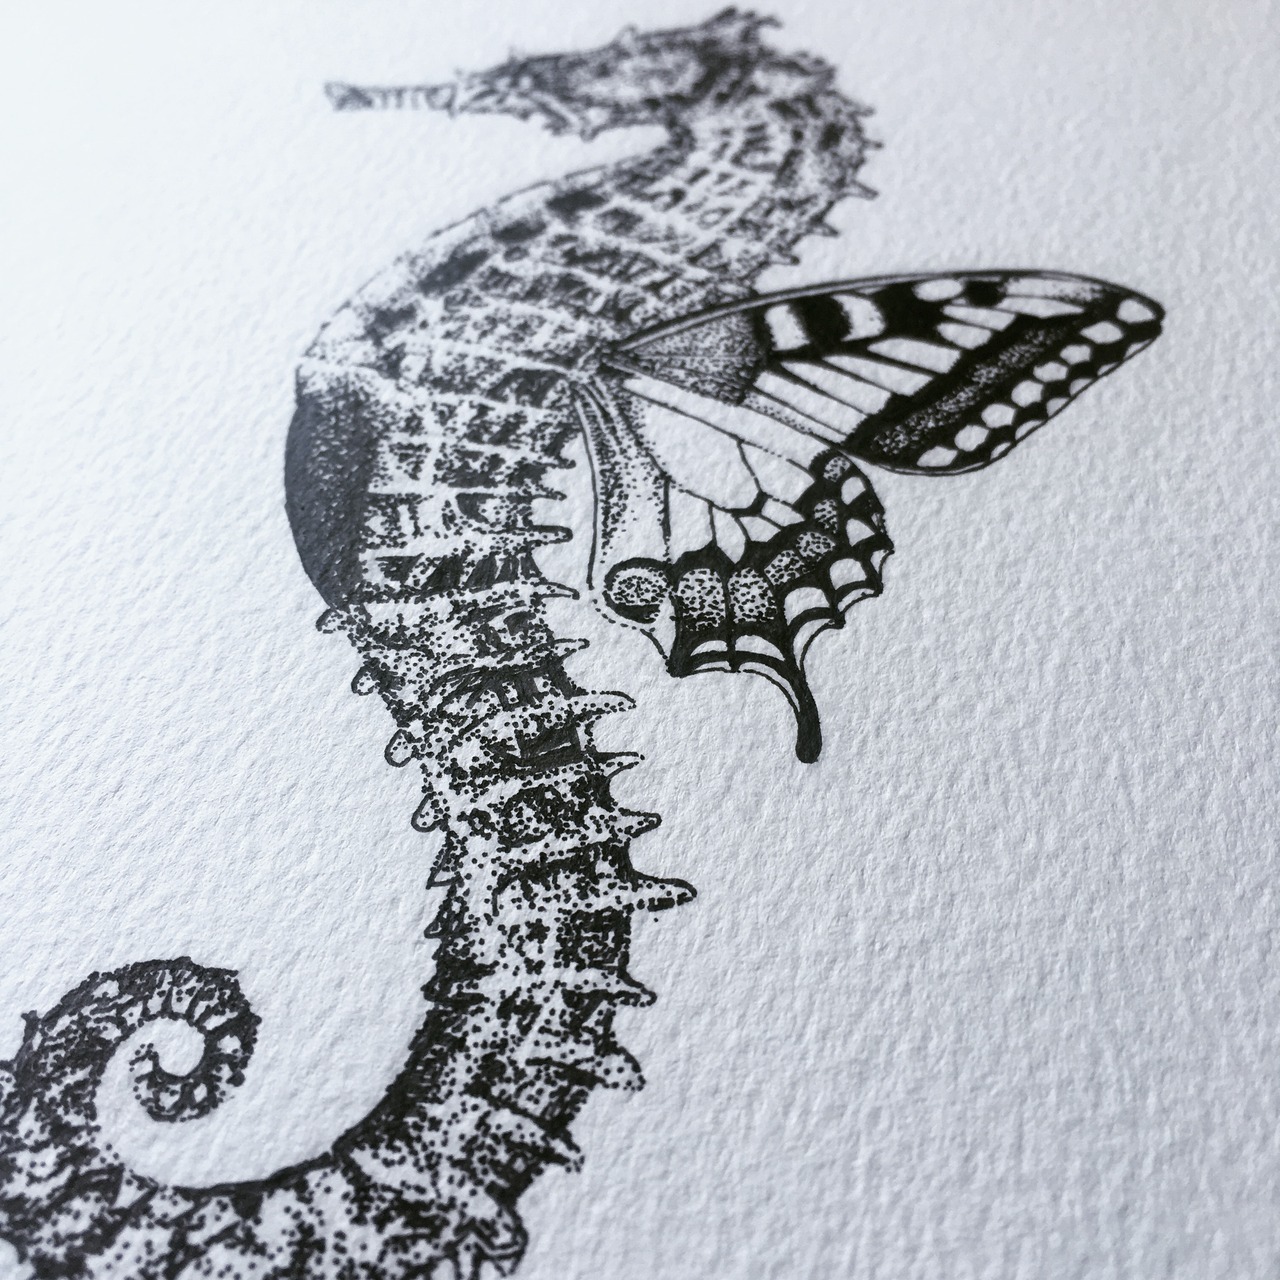 I love combining different elements together to create something a little bit mythical, as shown in this seahorse-butterfly illustration! _____________________________________________ Follow EatSleepDraw on Instagram for more inspiration!